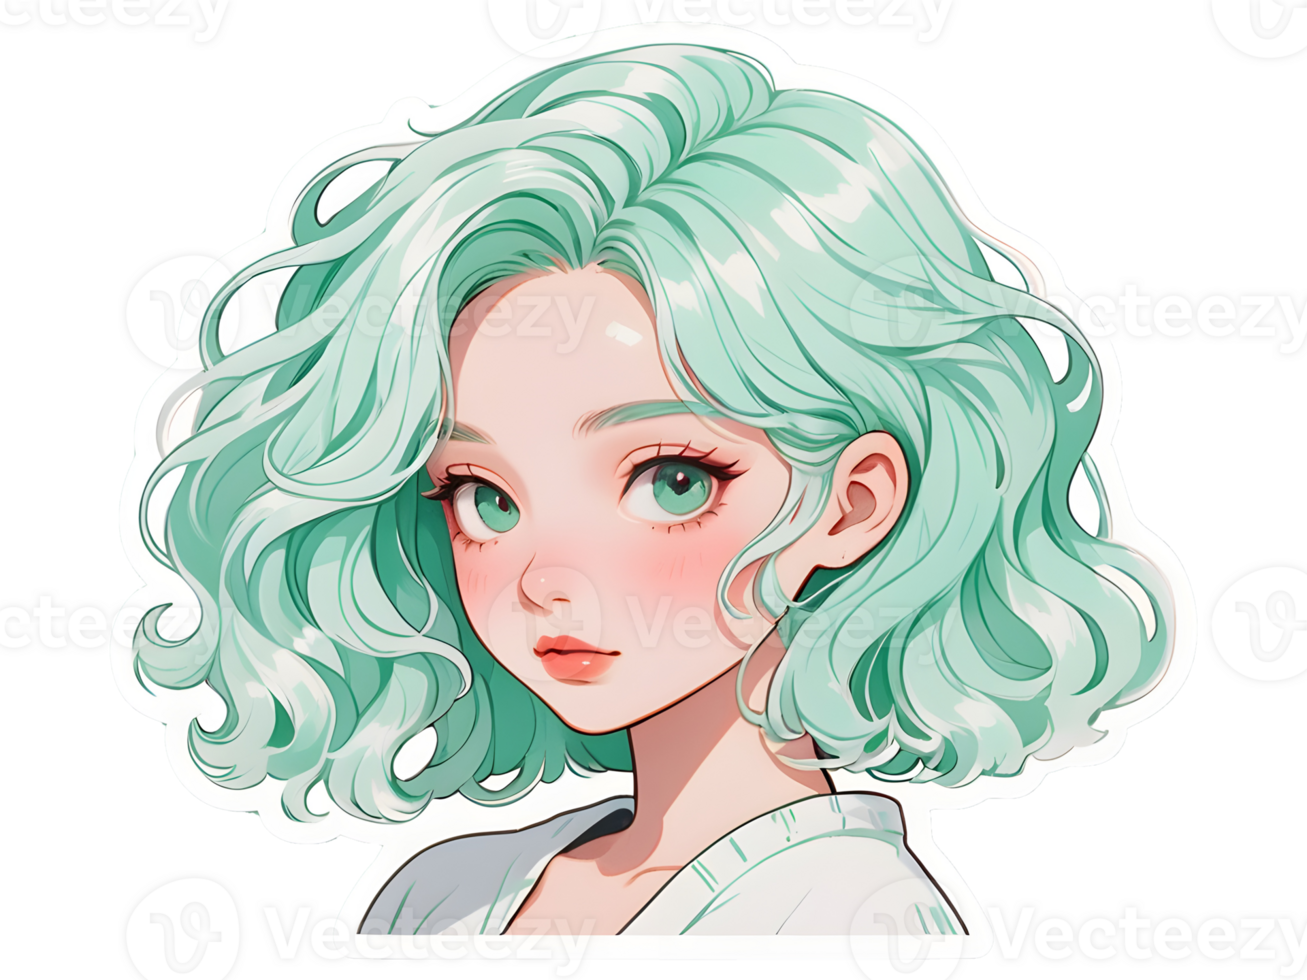 Beautiful cartoon anime girl with mint curly hair and green eyes sticker with white border png